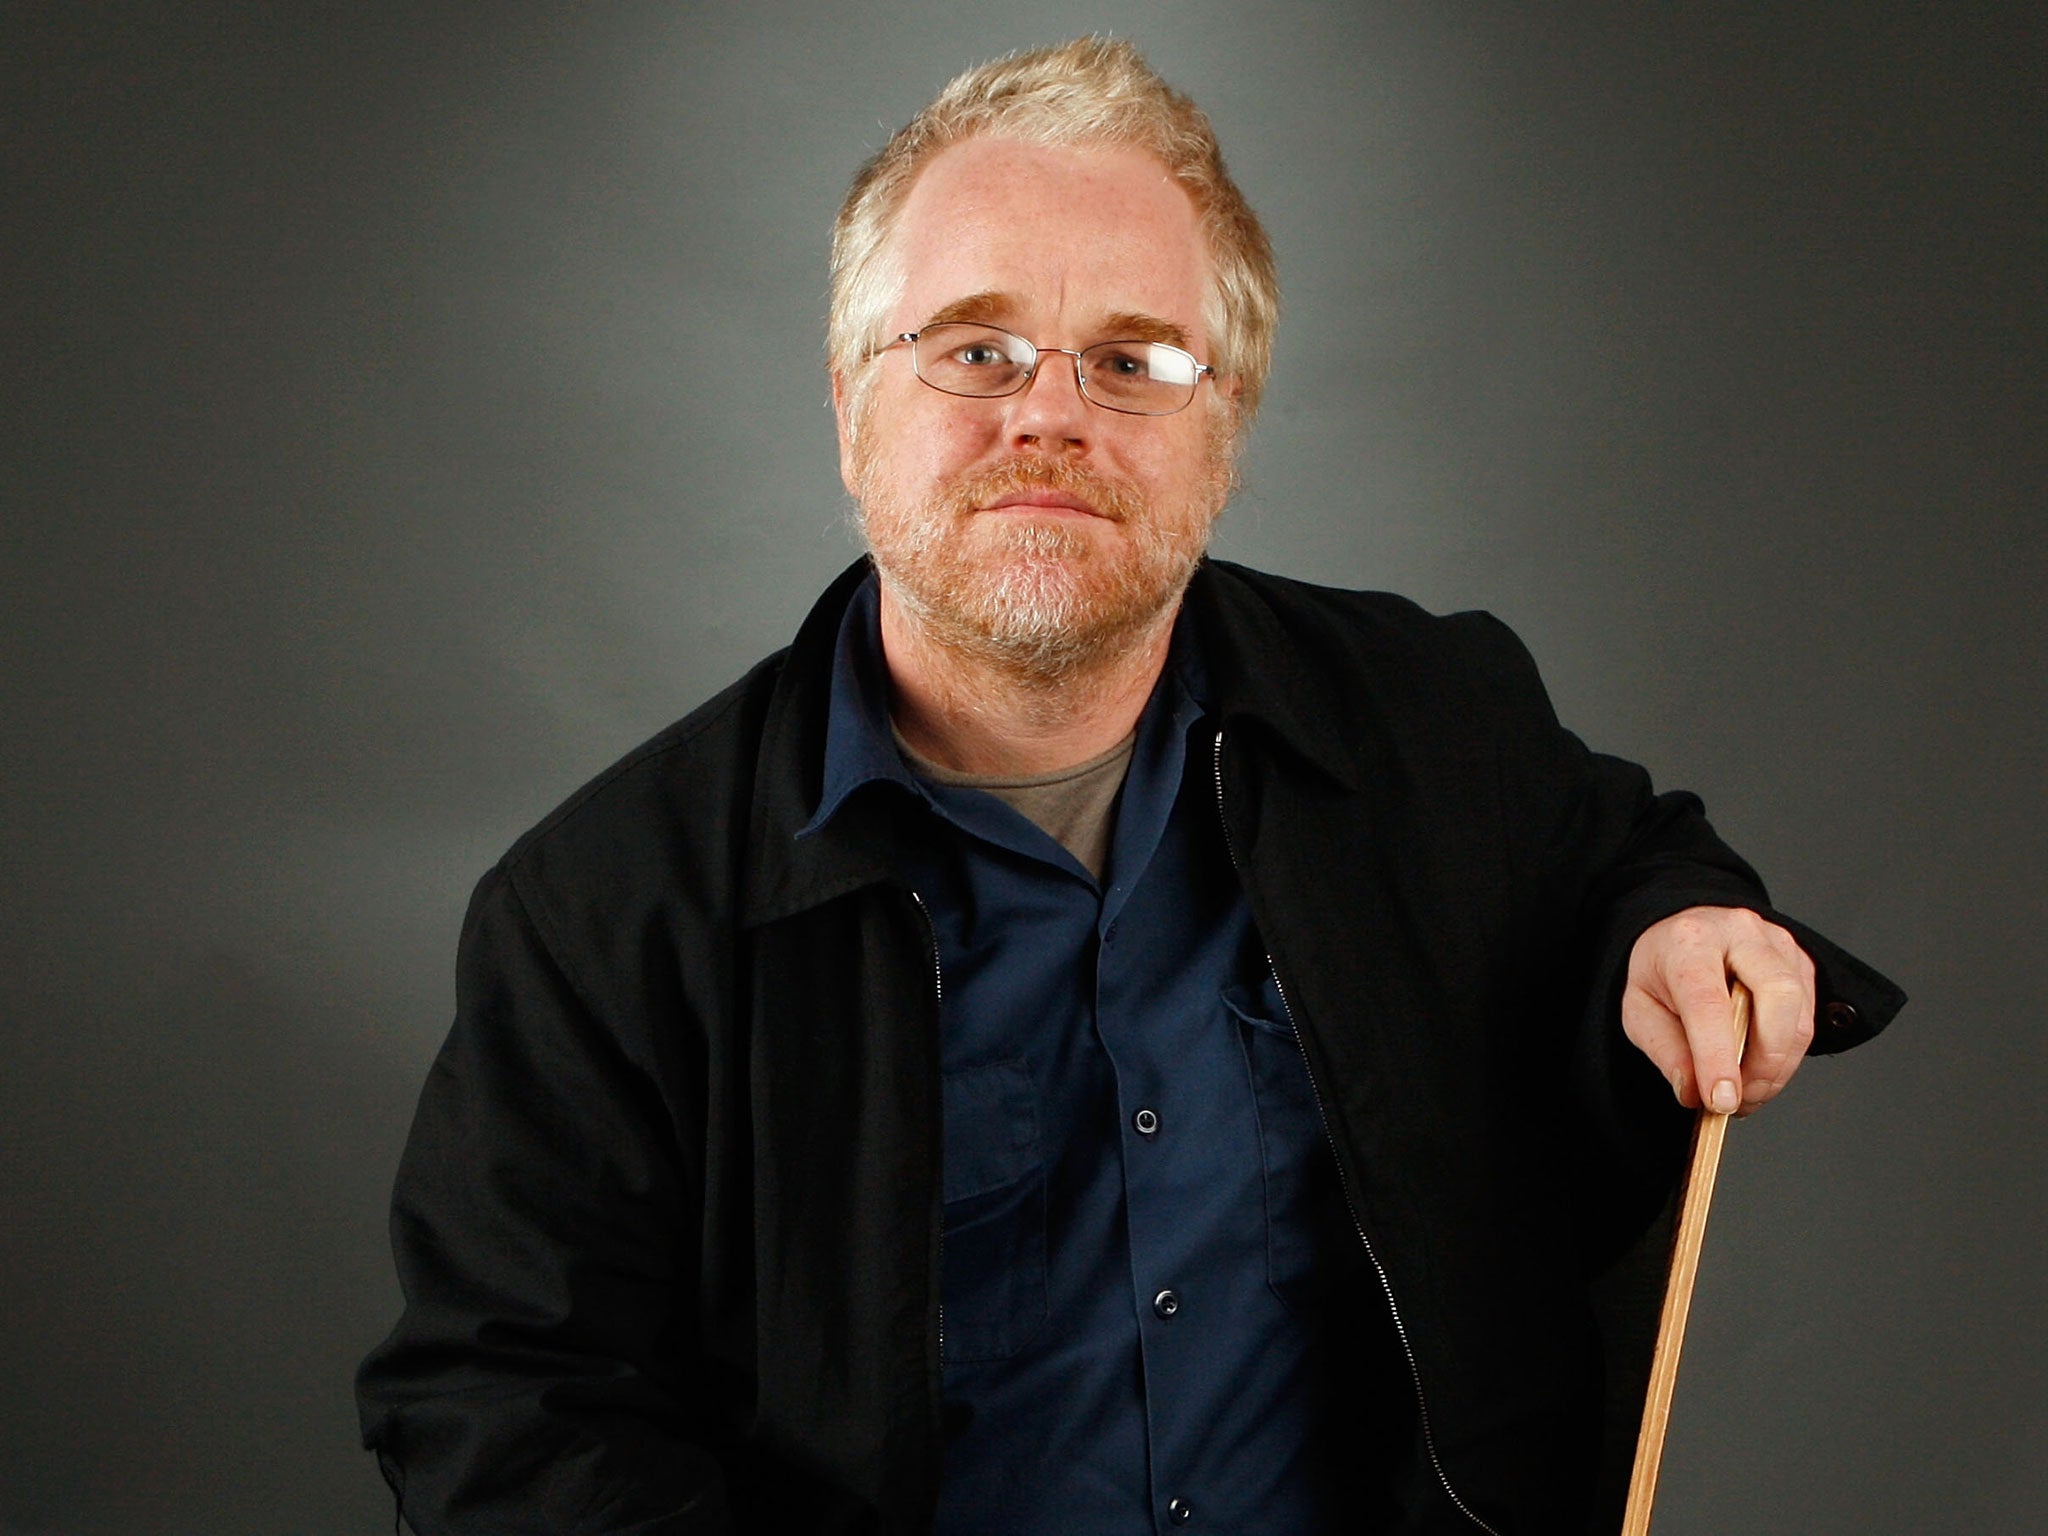 Philip Seymour Hoffman, 46, was found dead in his New York City apartment